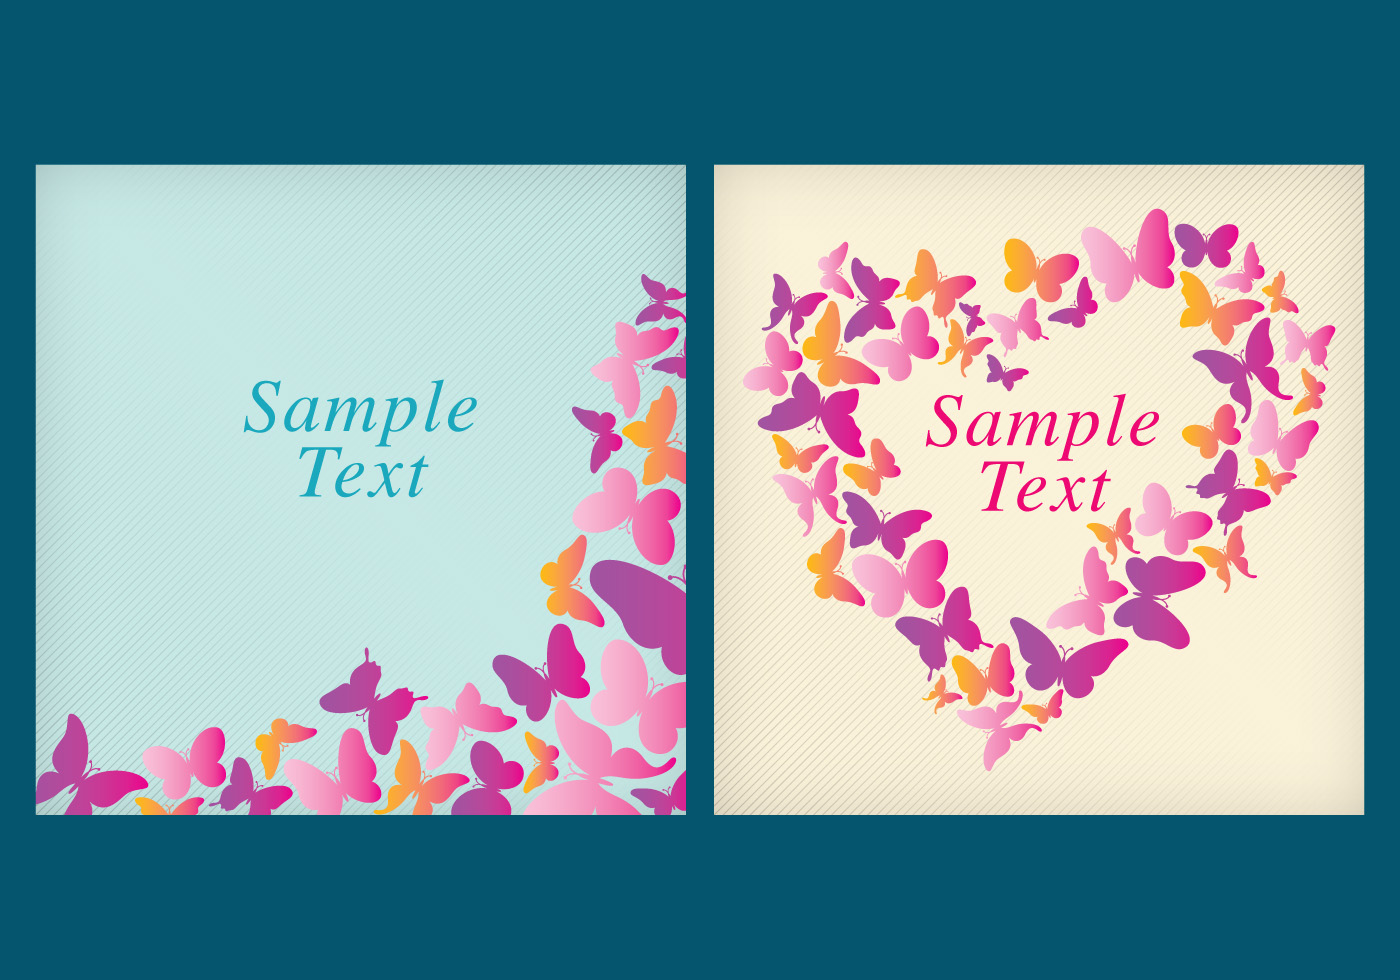 Download Butterfly Border Free Vector Art - (10,266 Free Downloads)